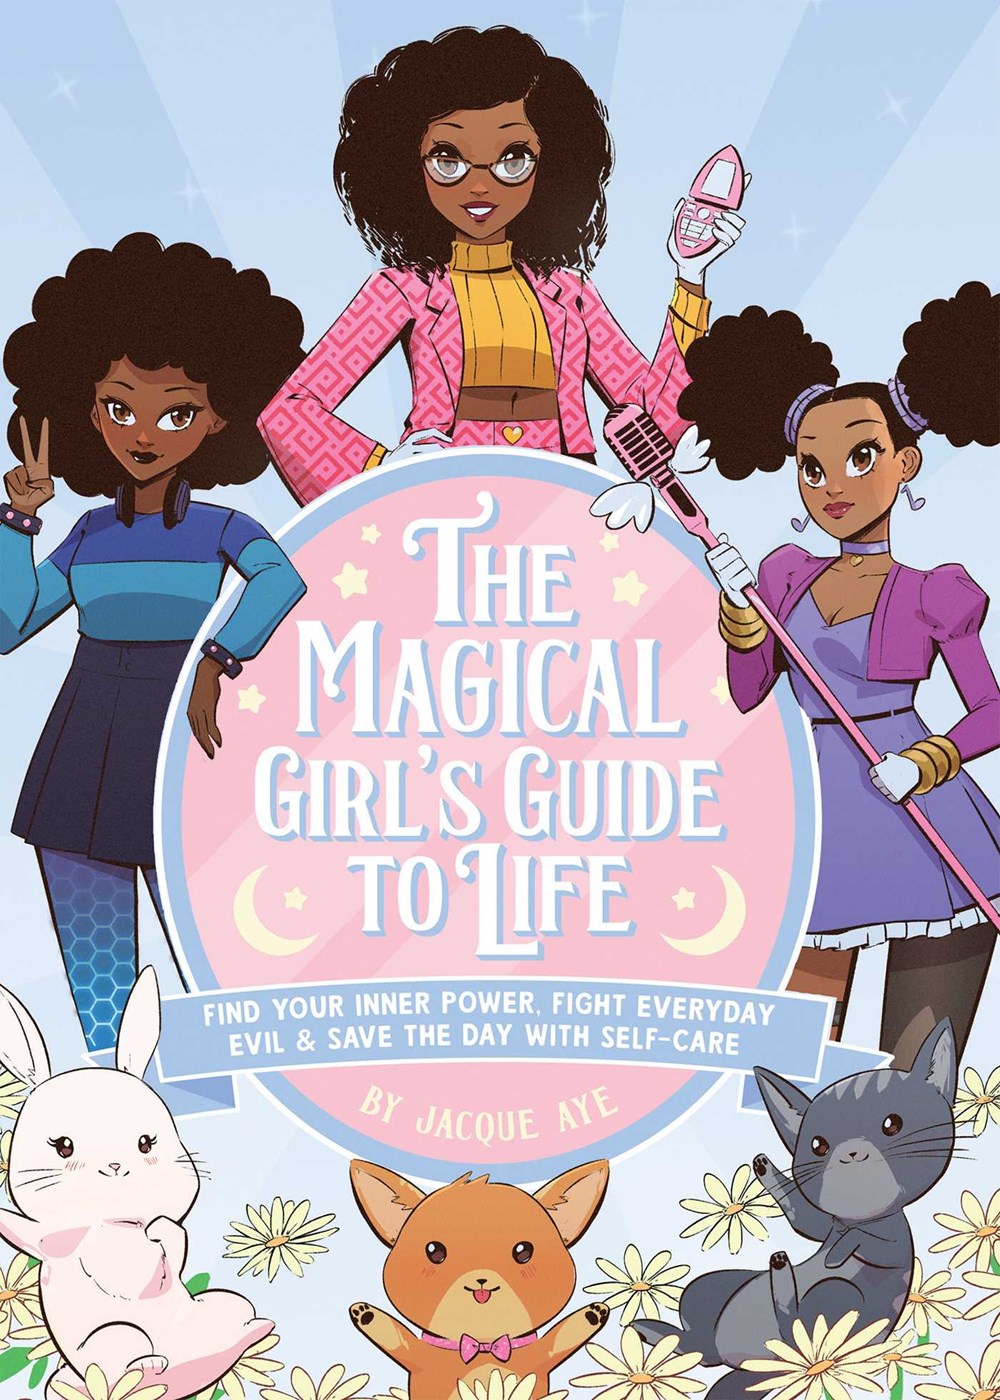 The Magical Girl's Guide to Life by Jacque Aye